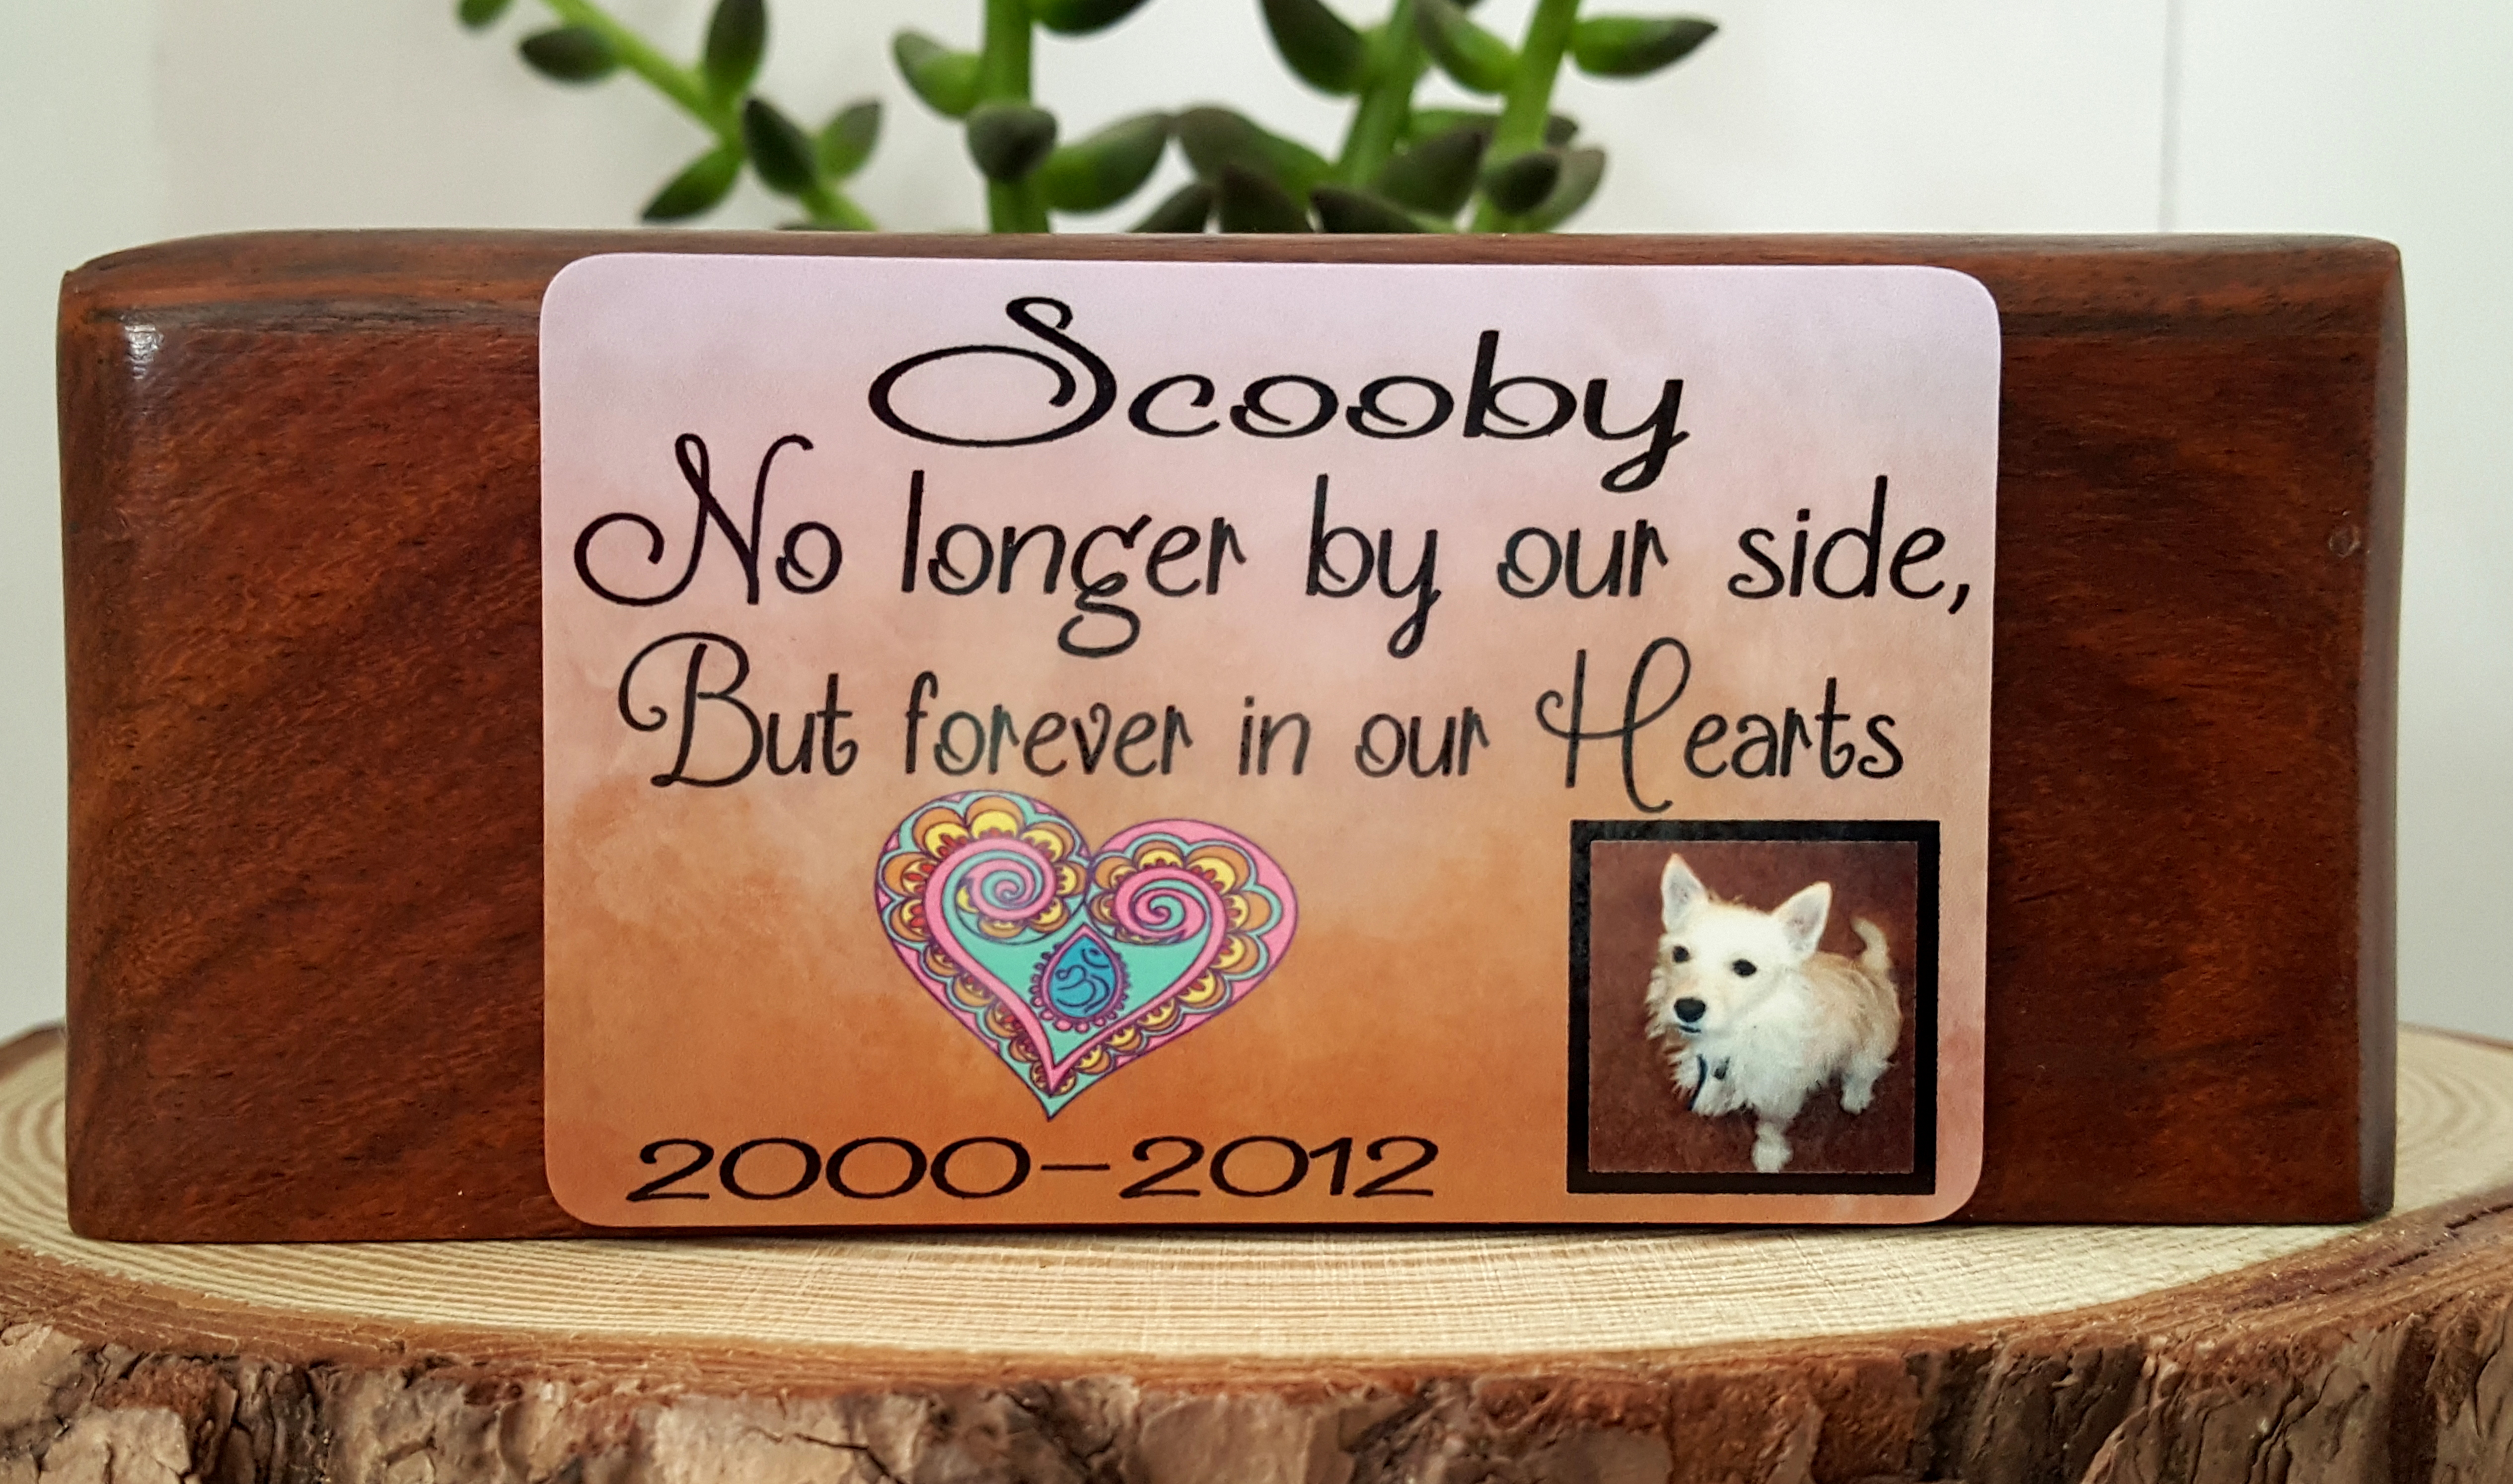 Pet Memorial Plaque made with sublimation printing